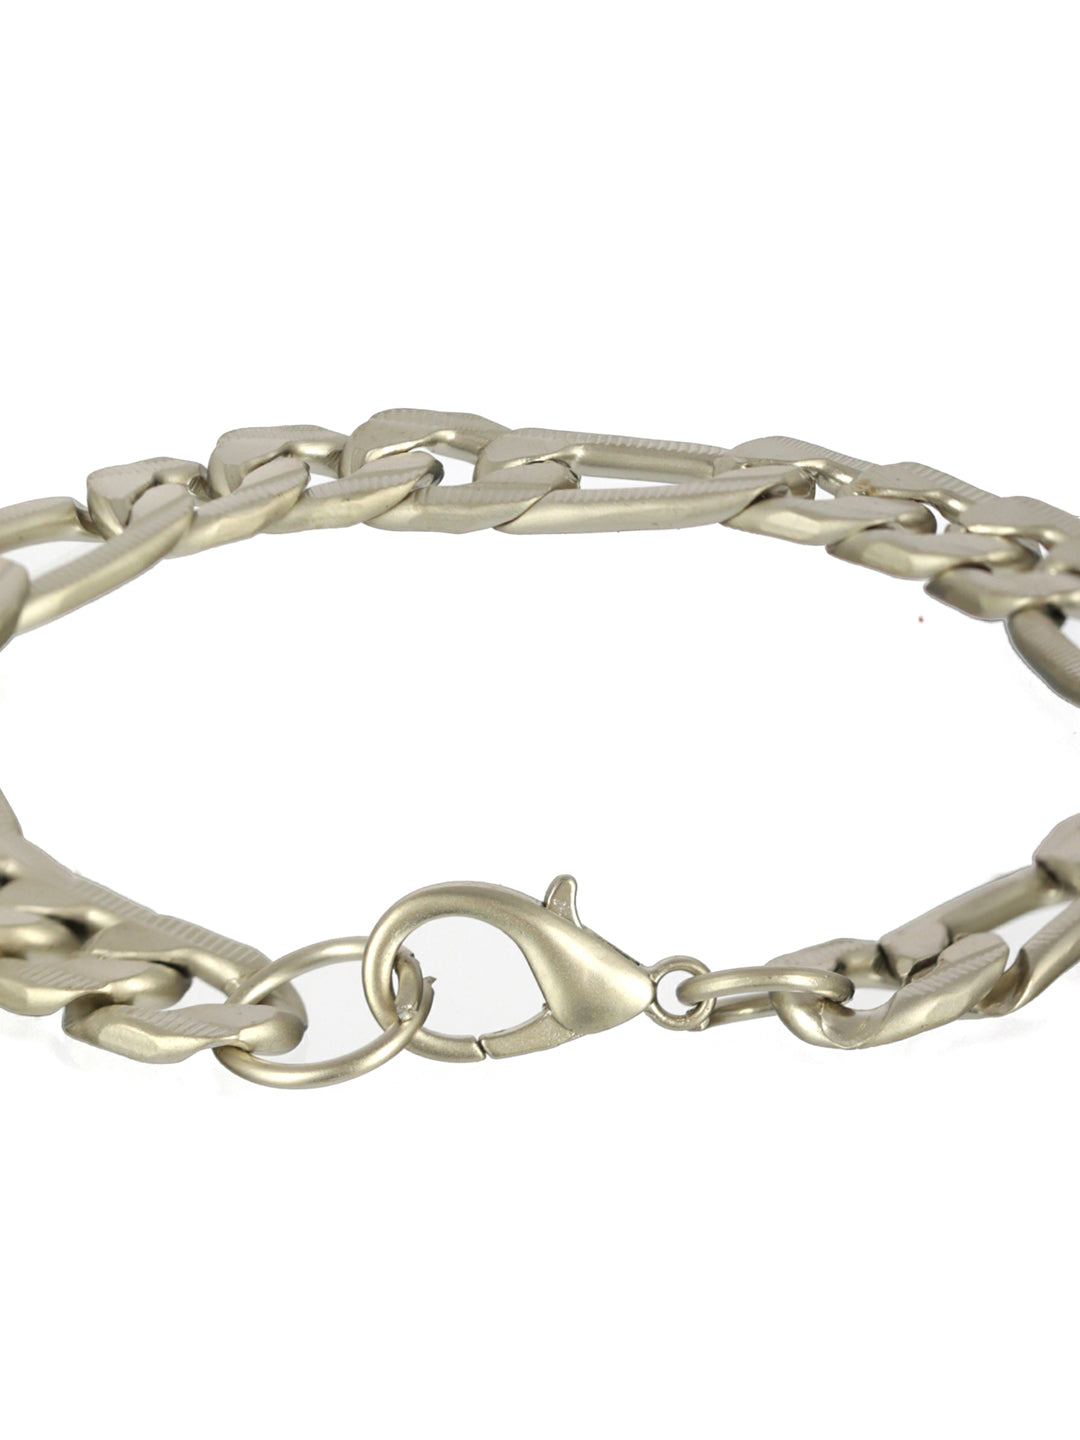 Stainless Steel Braided Cuban Chain Link Bracelet 8 Inches Long Industrial  Finish - TB-TN-0014